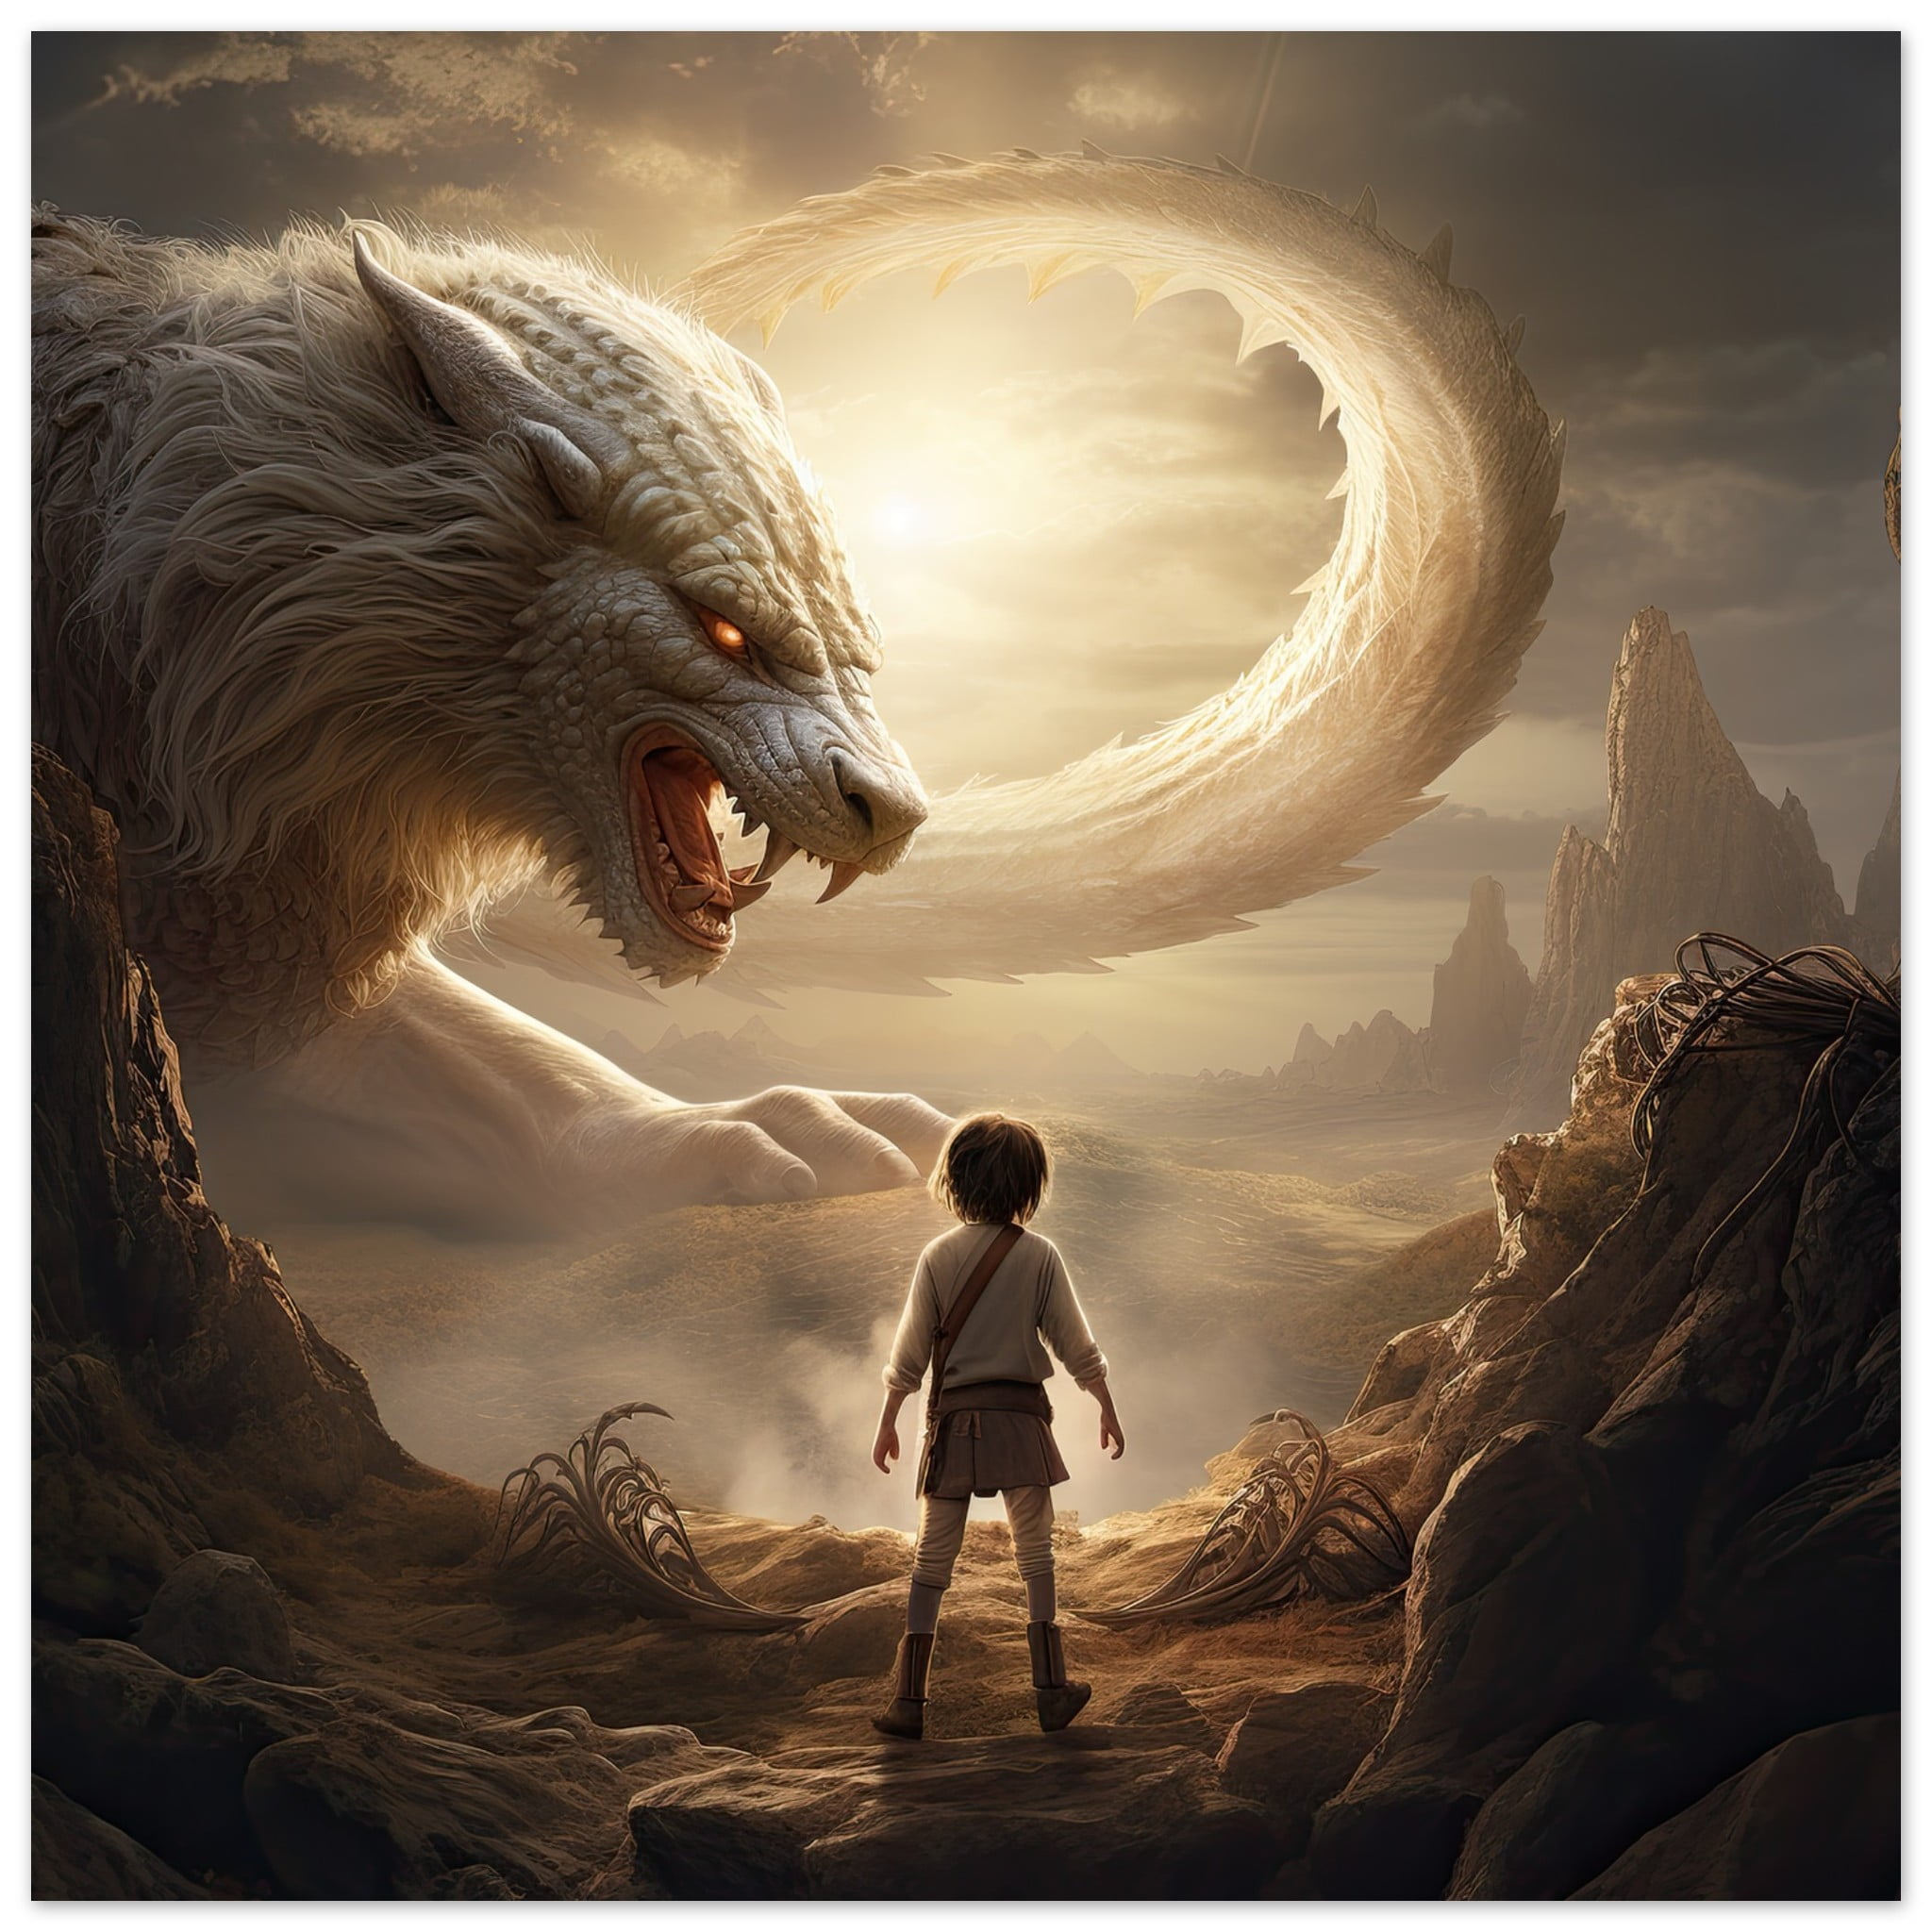 The Boy and the Chimera Art Poster - 45x45 cm / 18x18″